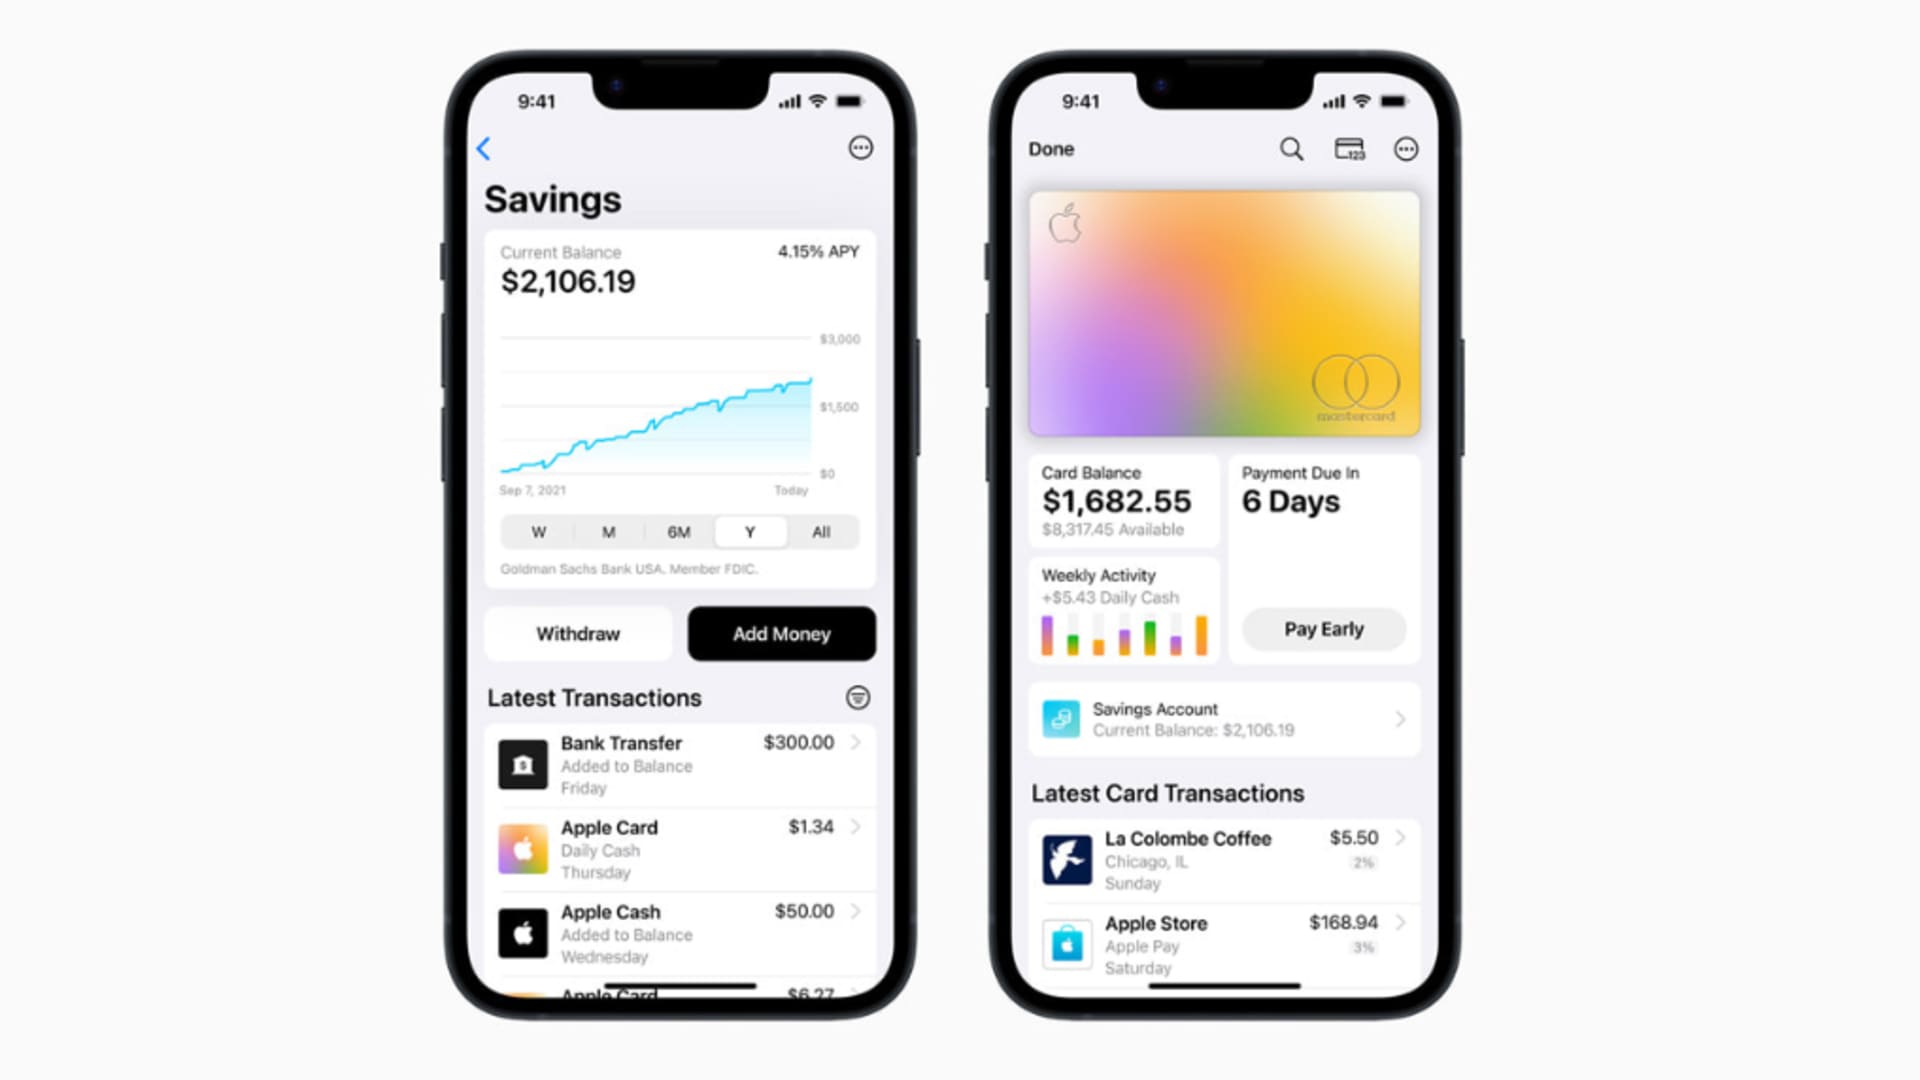 Apple introduces a savings account with an interest rate of 4.15%